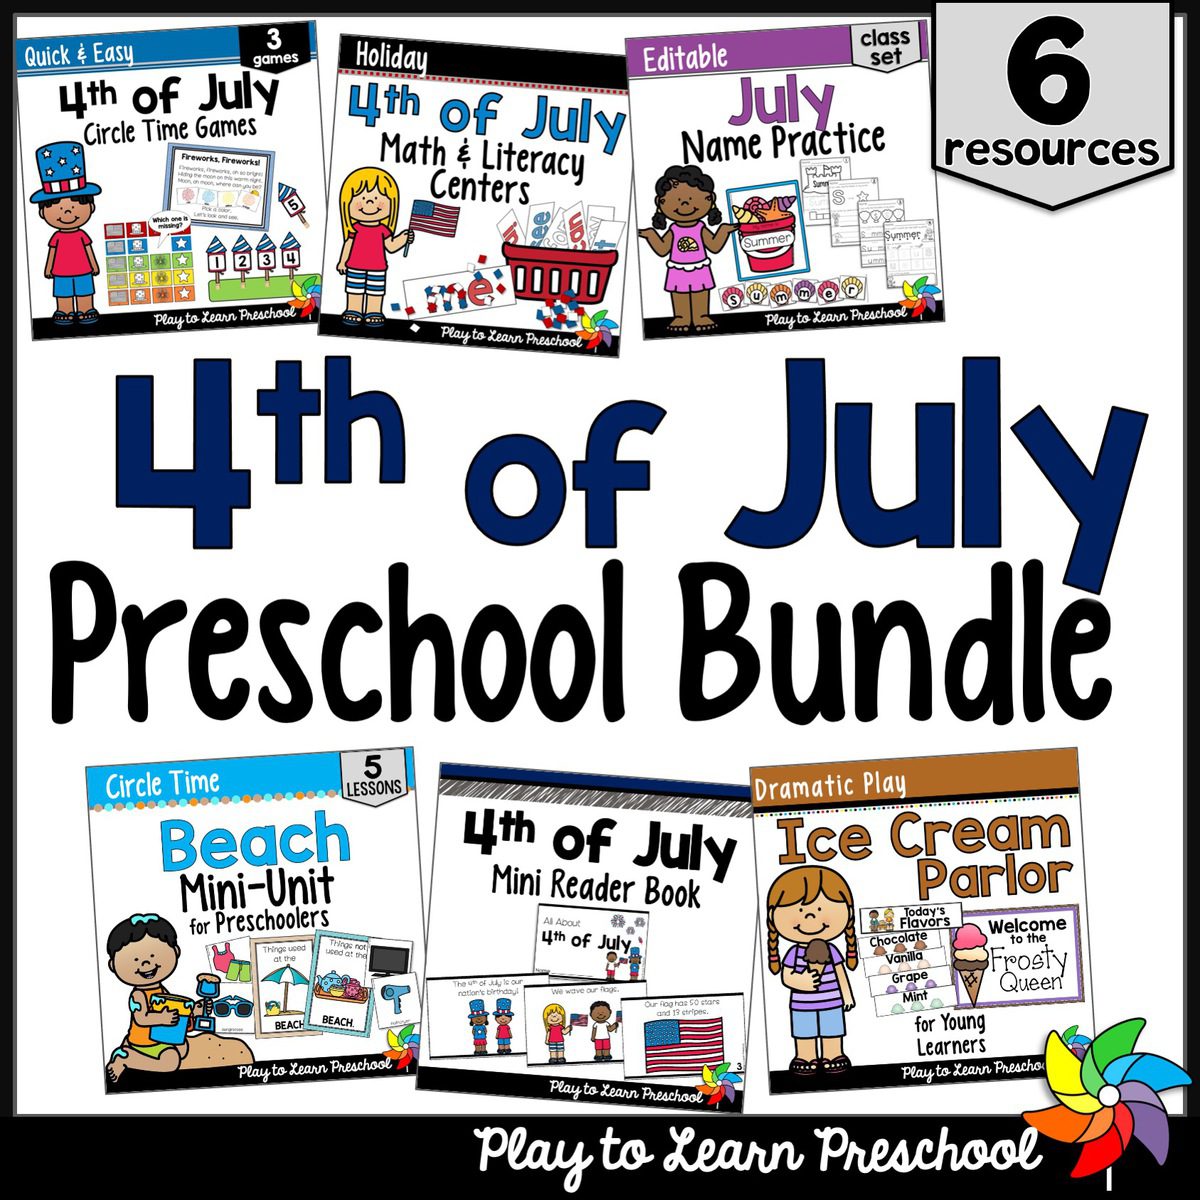 Cover for preschool lessons and activities for the 4th of July